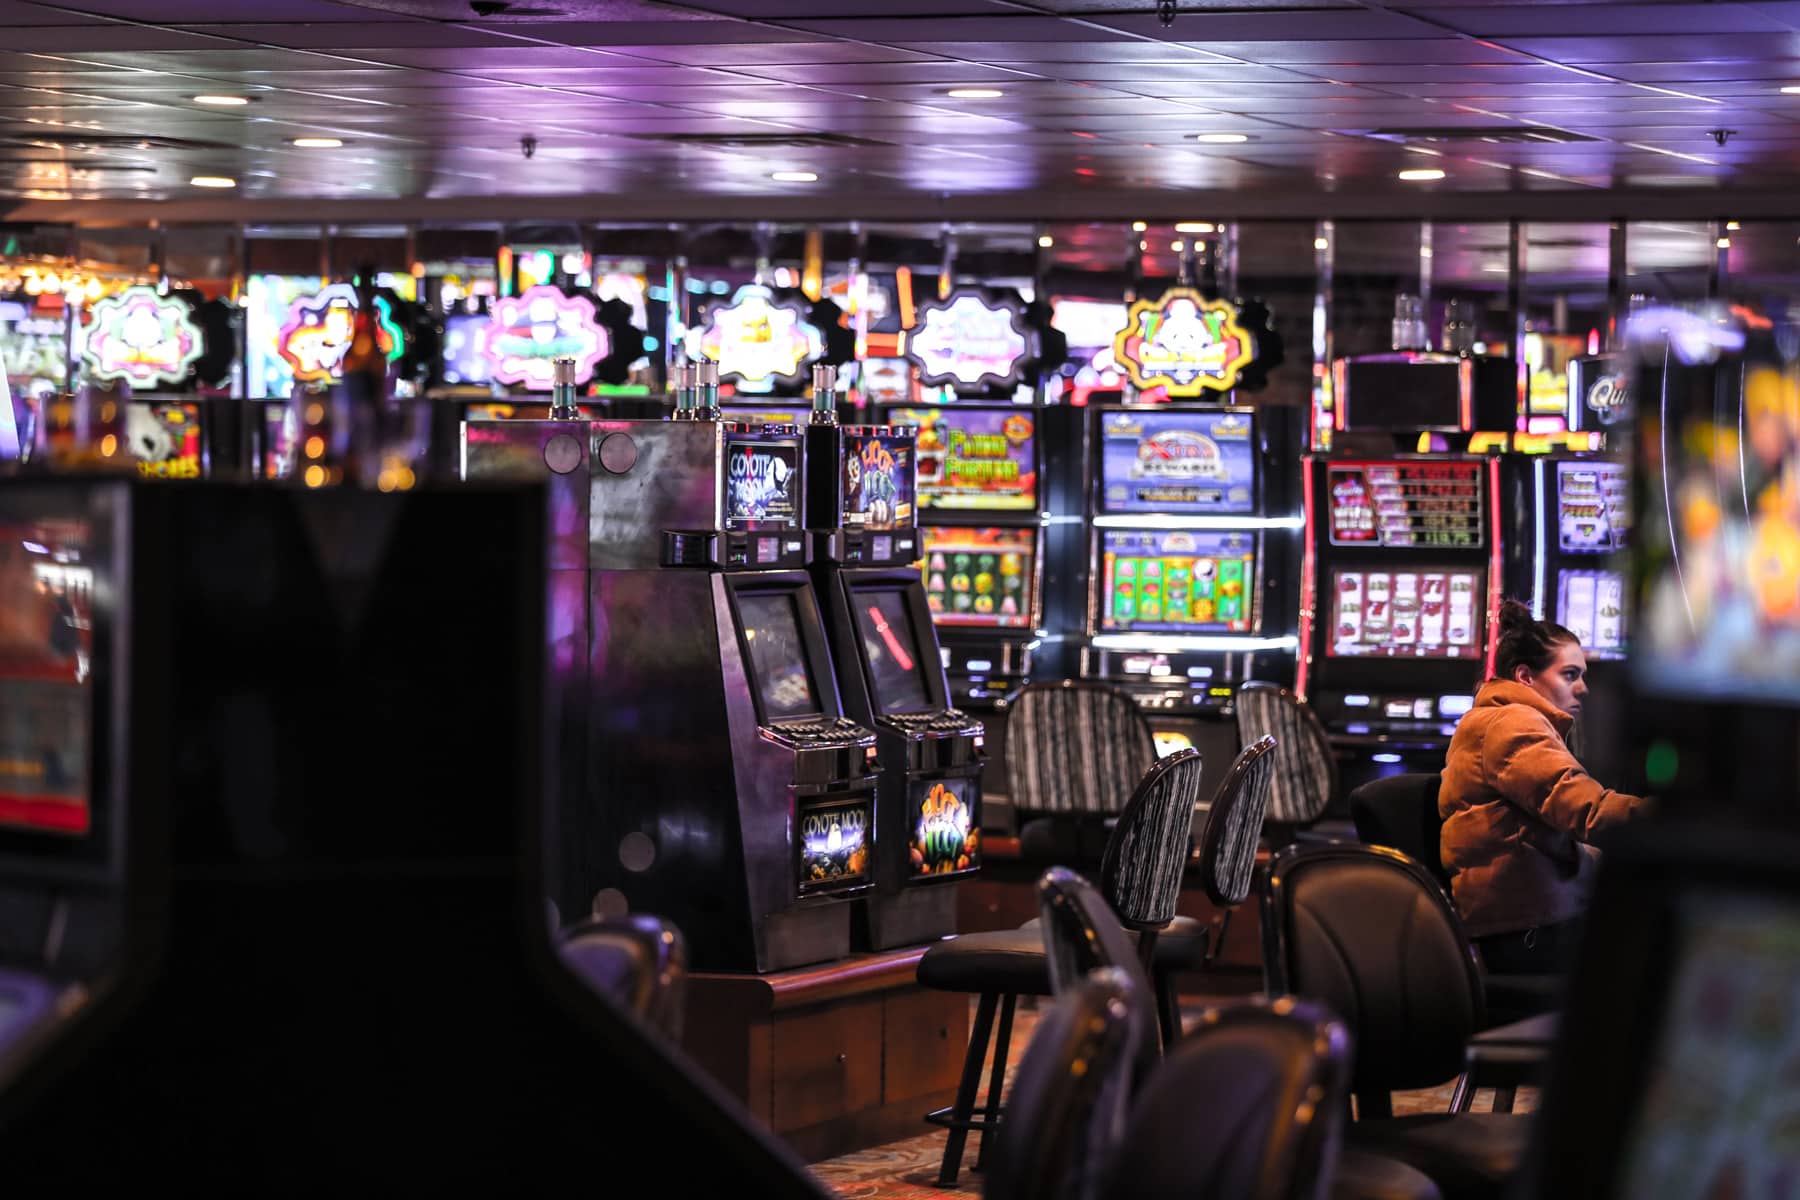 How to Recognize Signs of Gambling Addiction and Promote Responsible Gaming at Your Casino